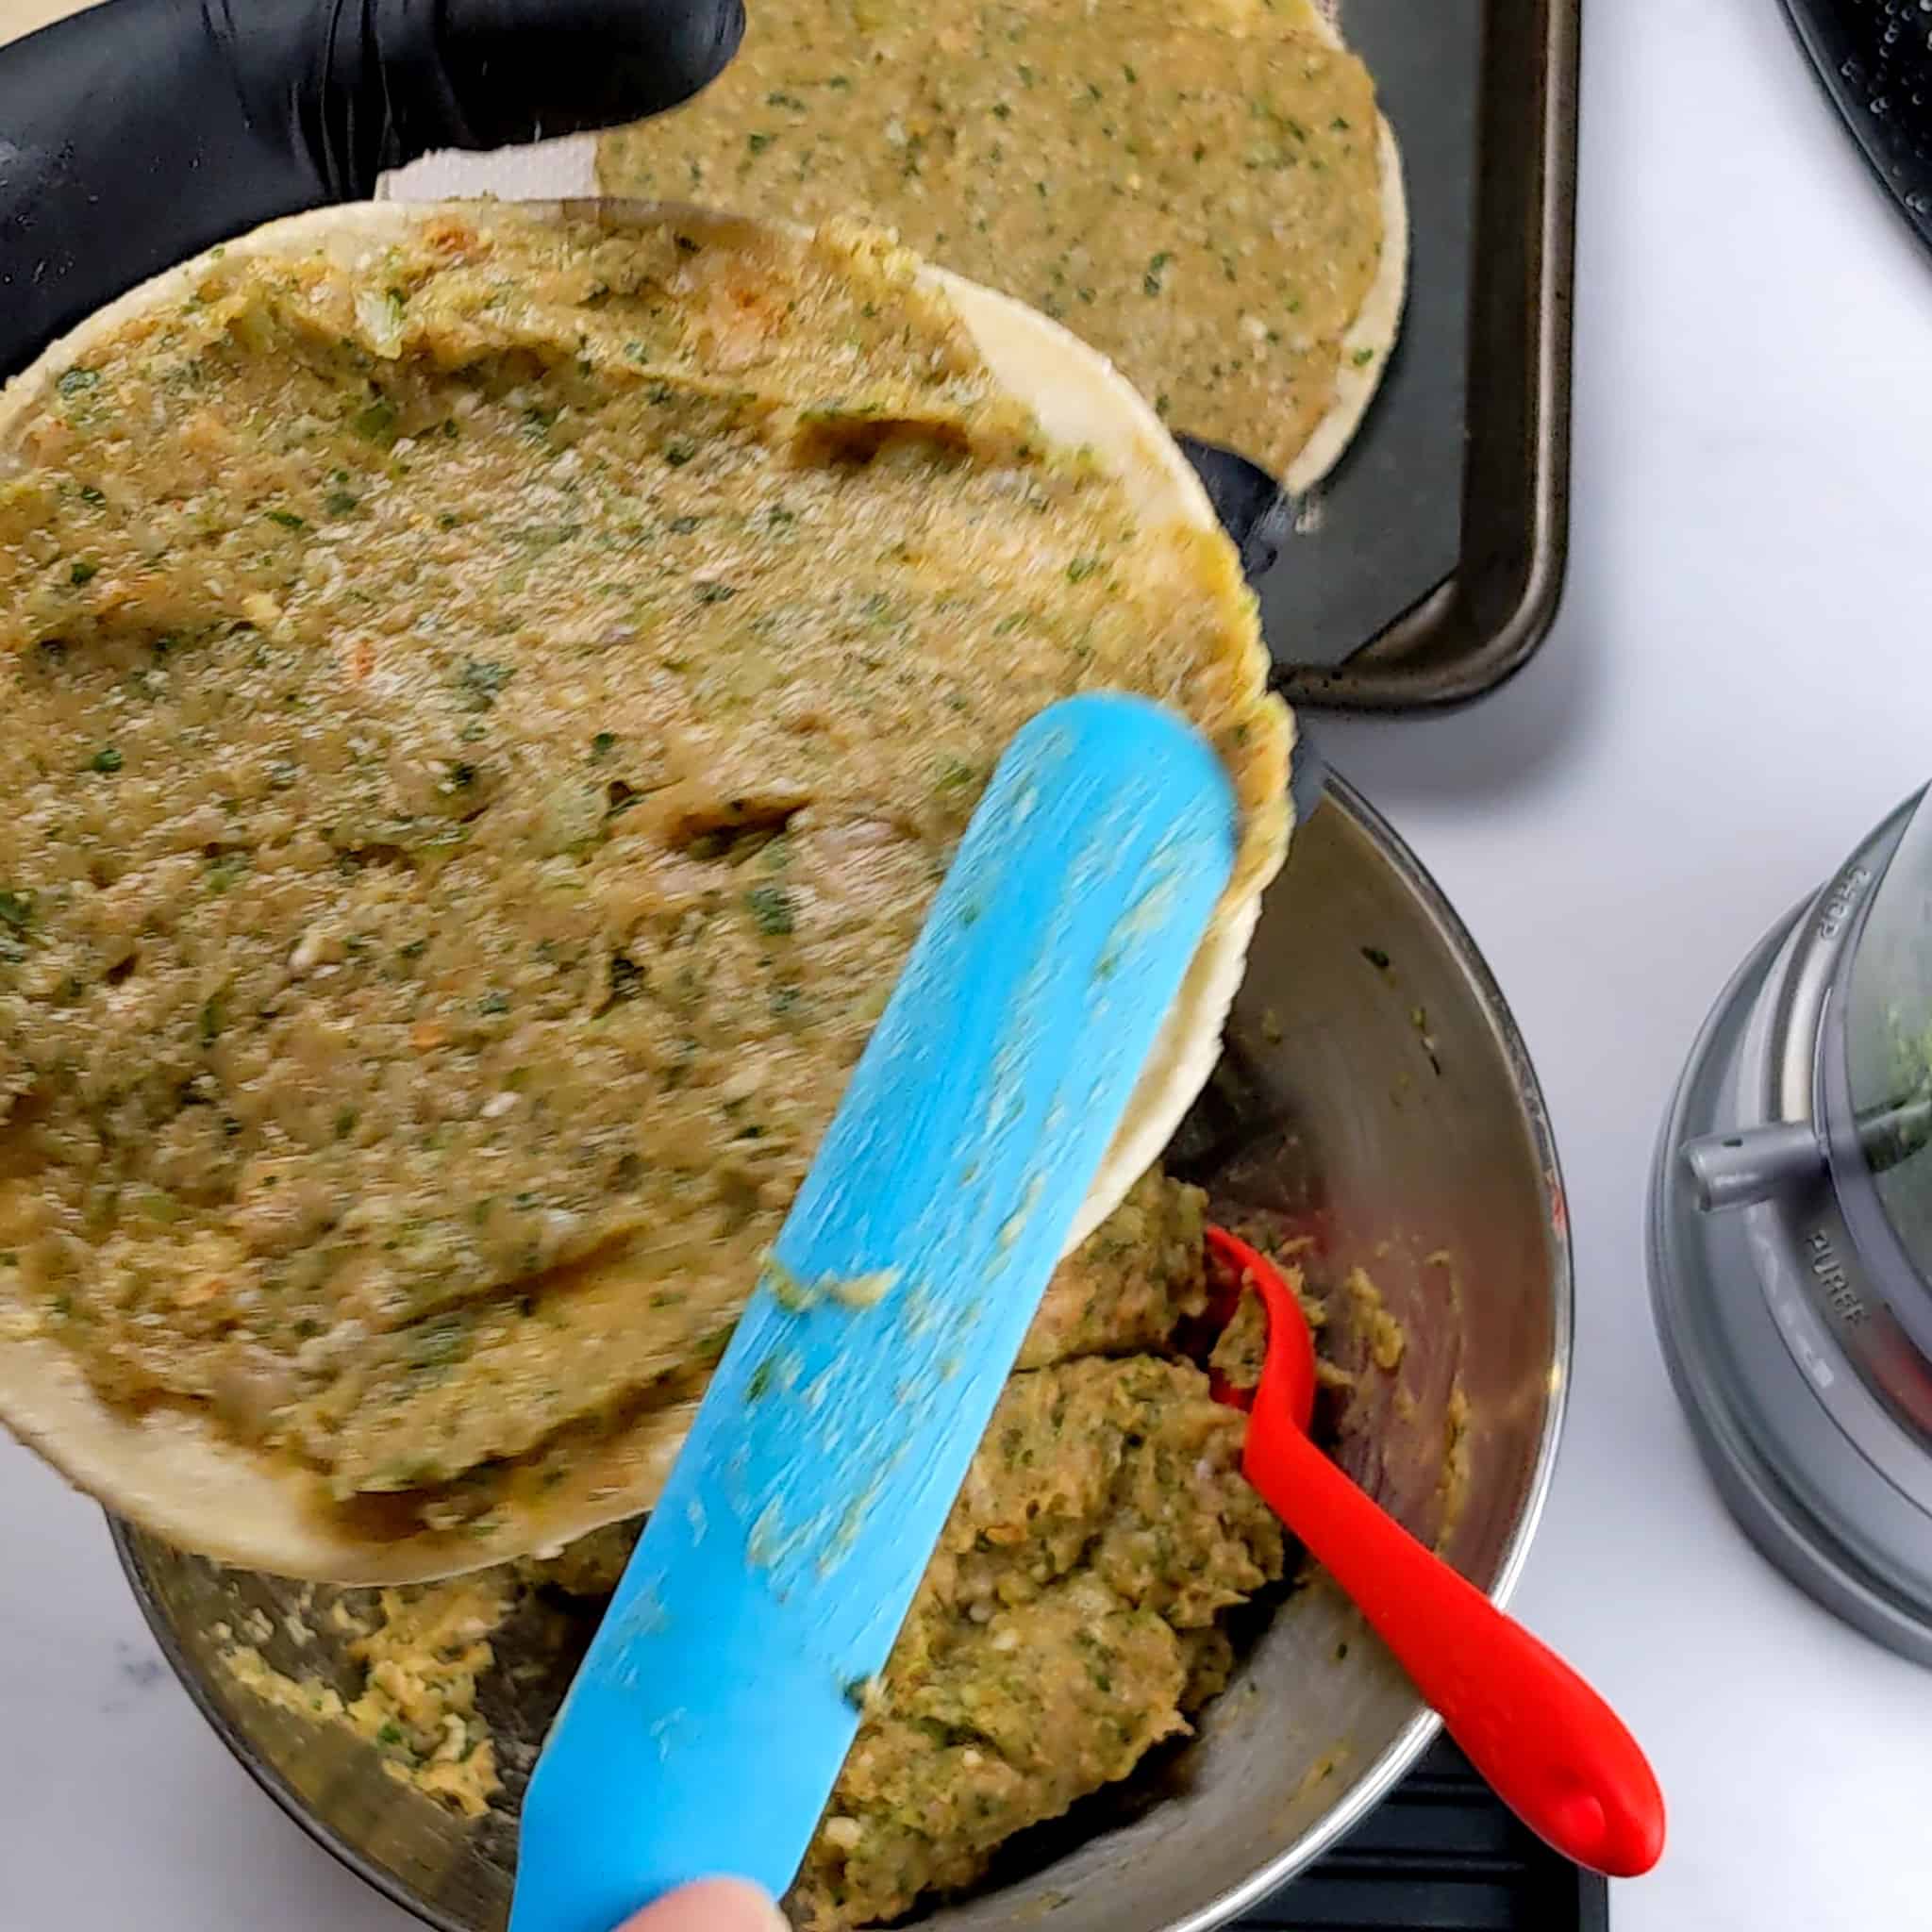 a long silicone spatula is being used to spread out the taco meat mixture to the edges of a corn tortilla being held in a gloved hand.